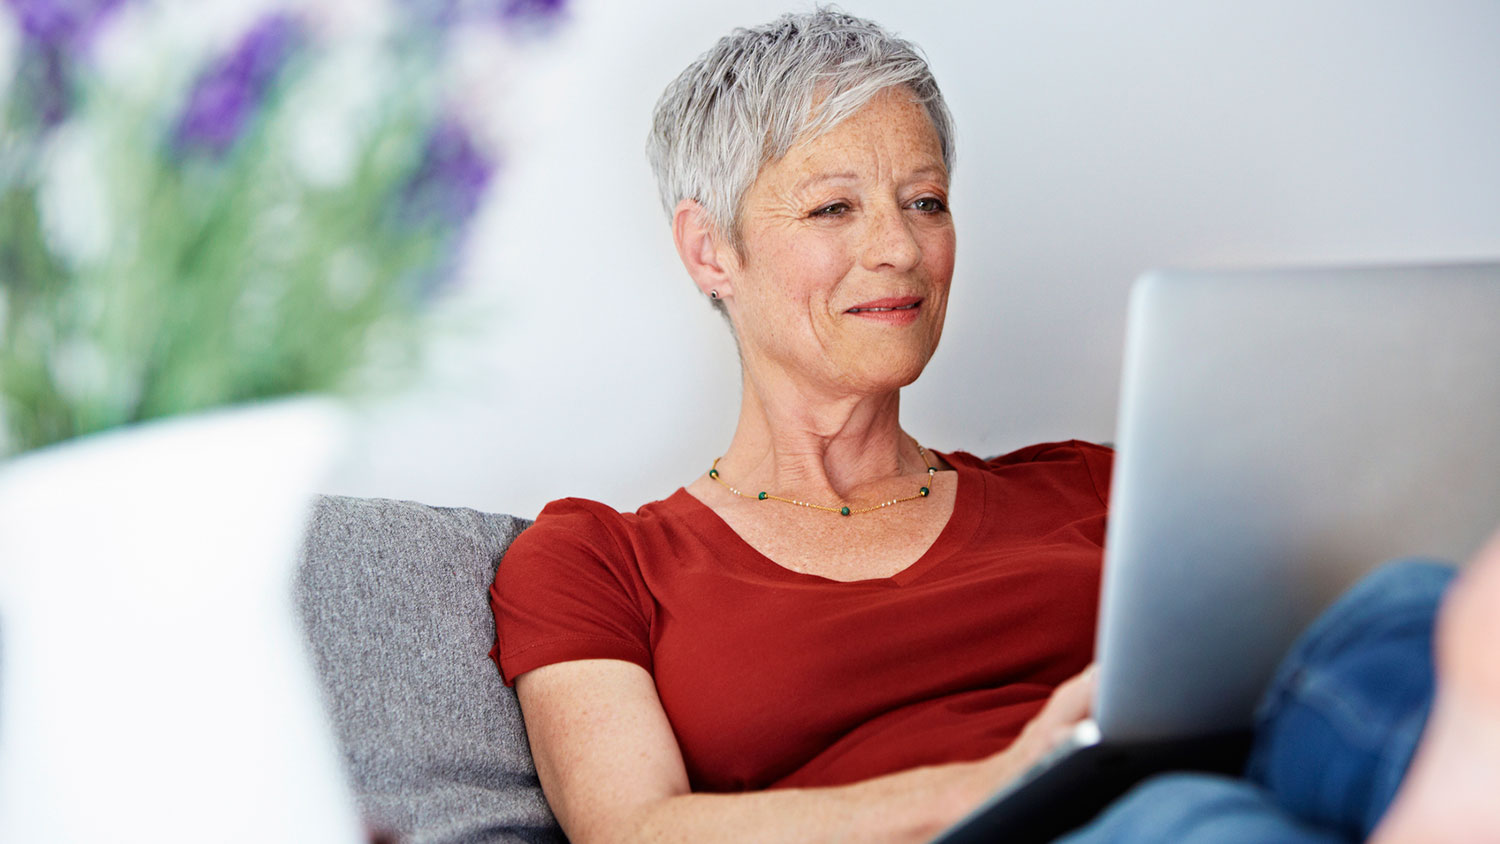 Online Dating After 60: Liars, Cads and Bores